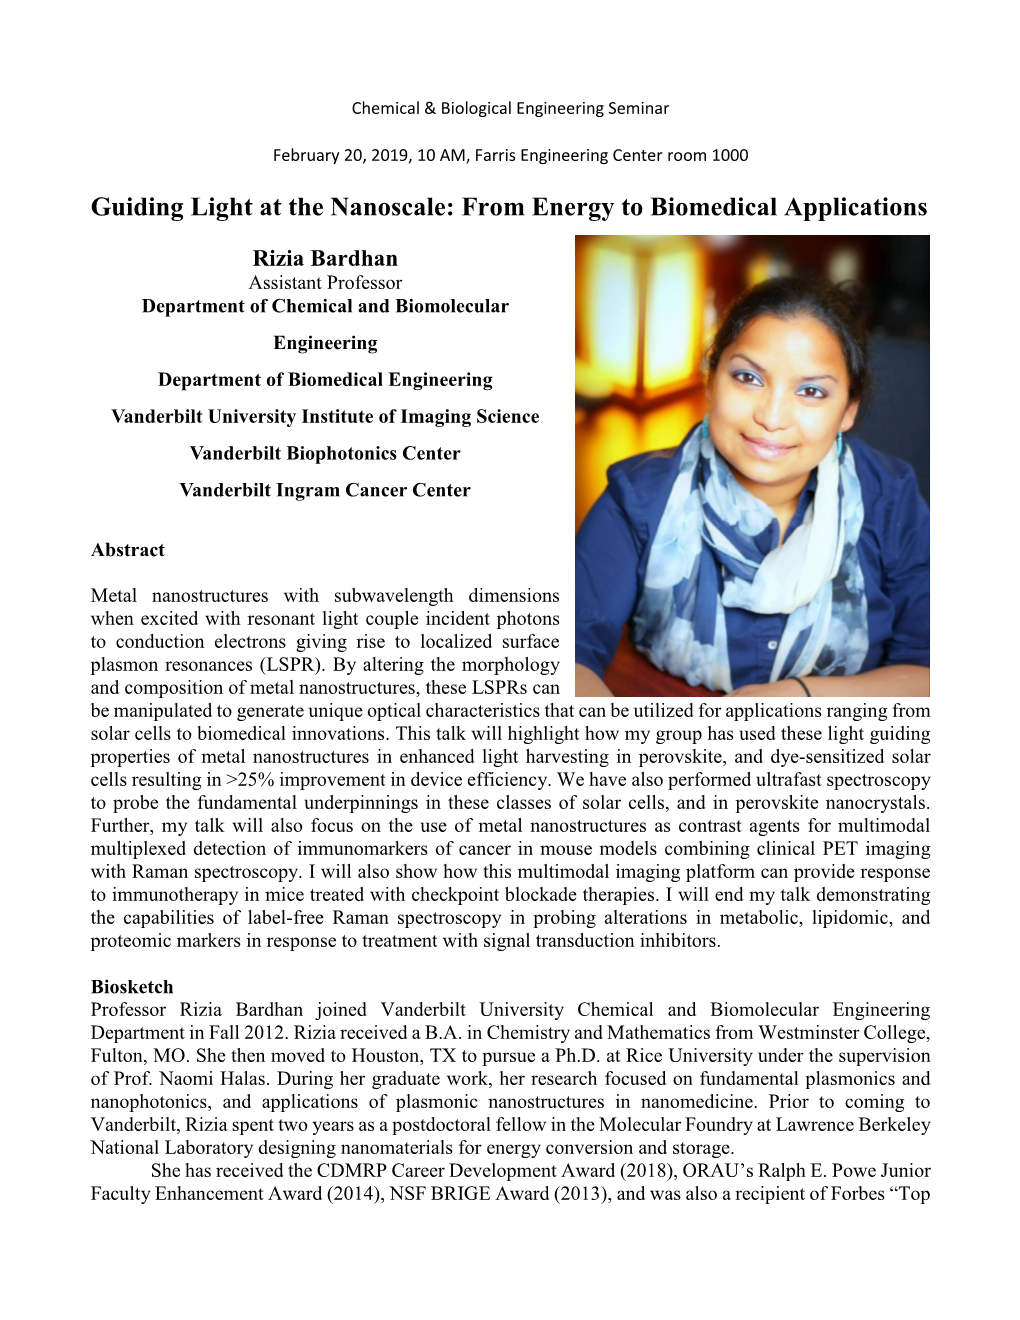 Guiding Light at the Nanoscale: from Energy to Biomedical Applications